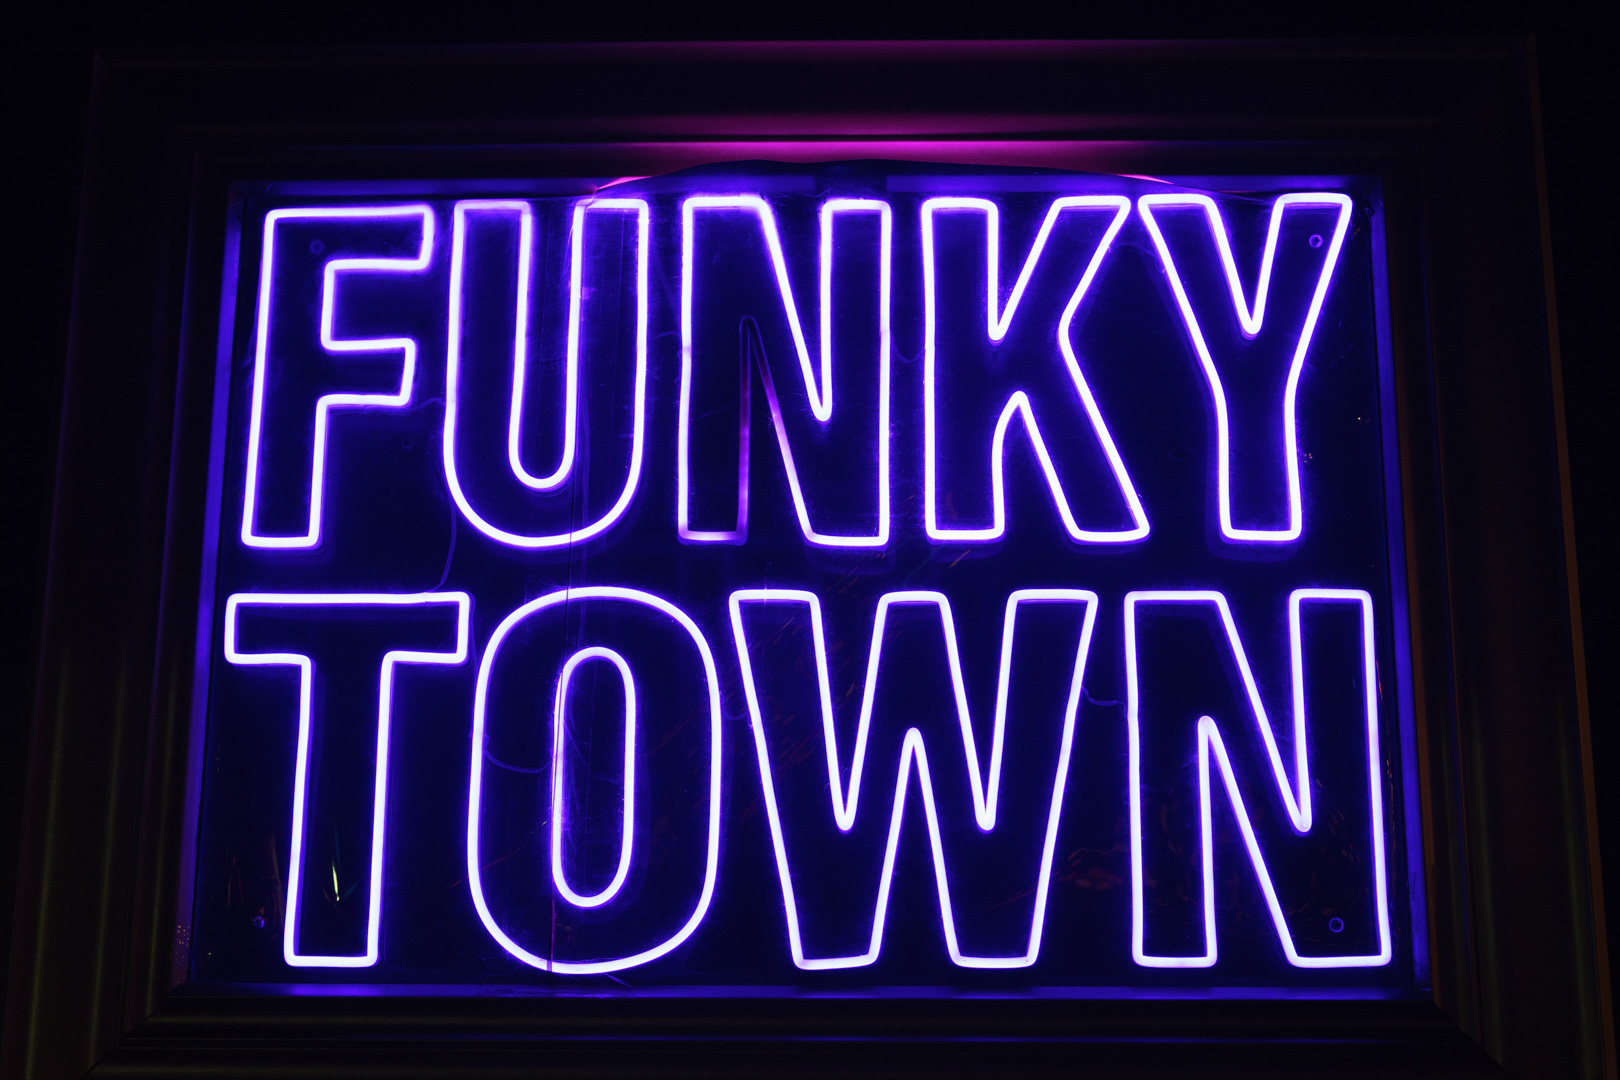 A neon sign says "FUNKY TOWN"